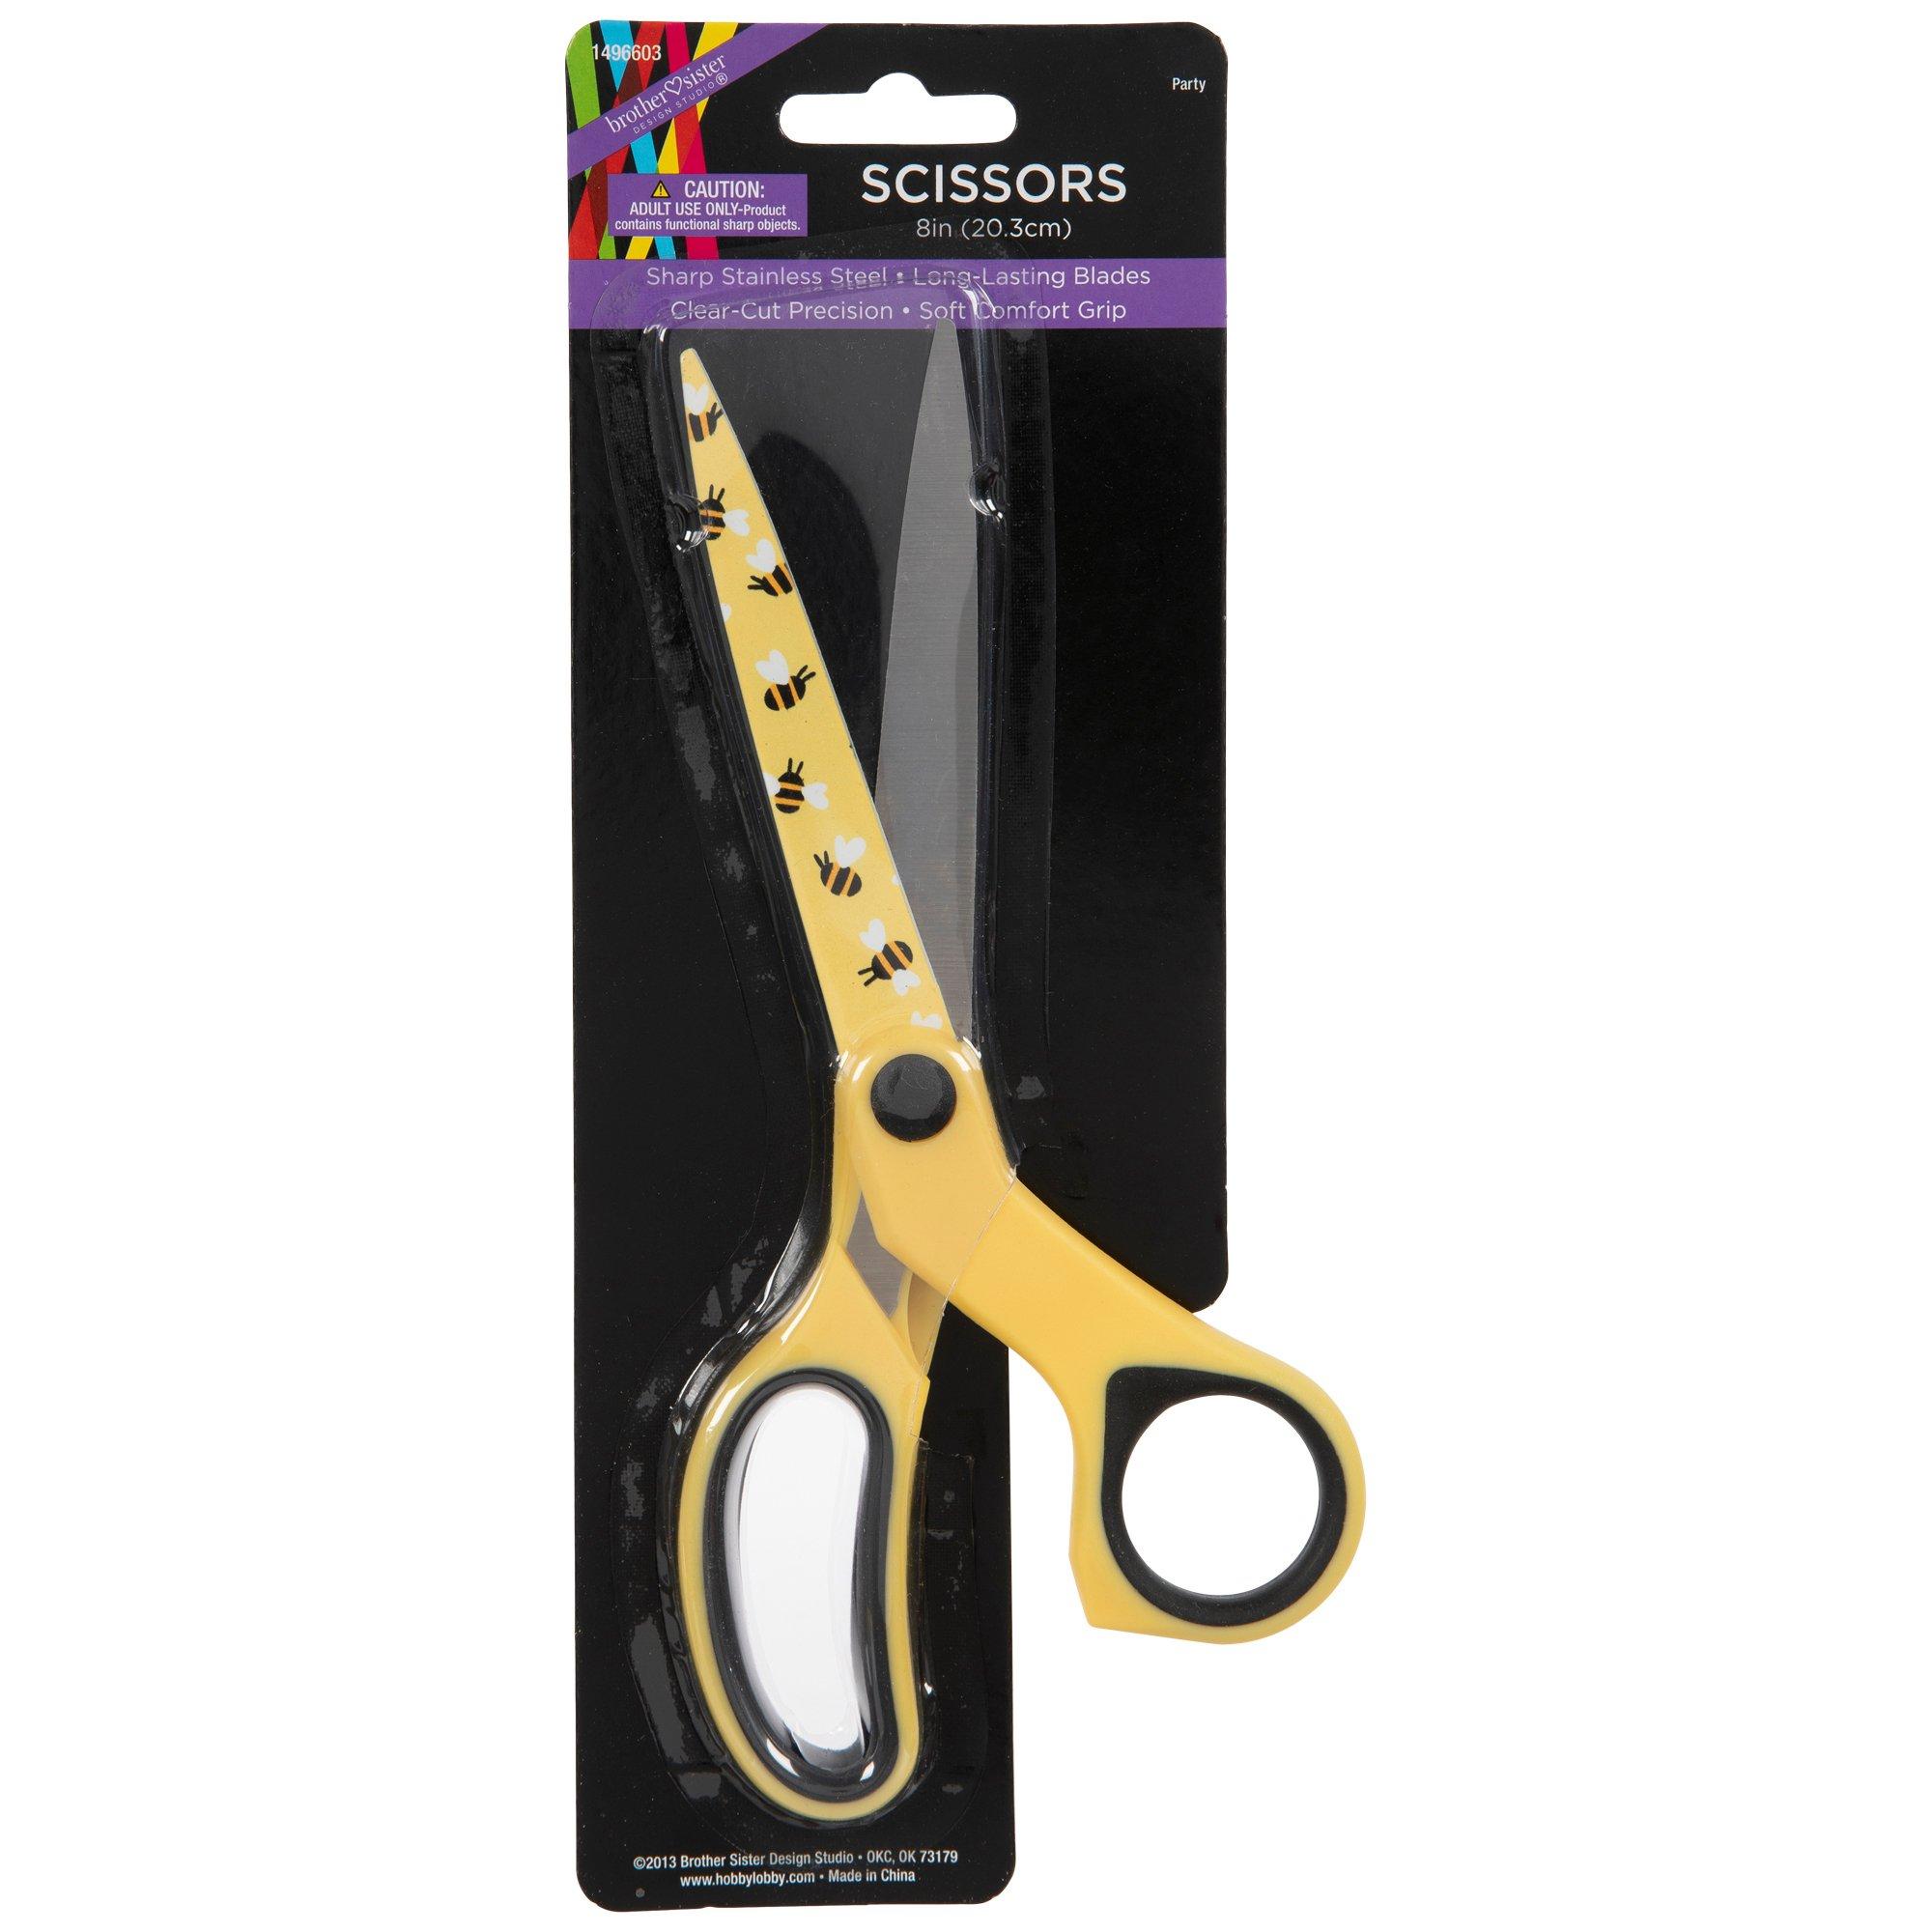 Floral Embroidery Scissors - 4, Hobby Lobby